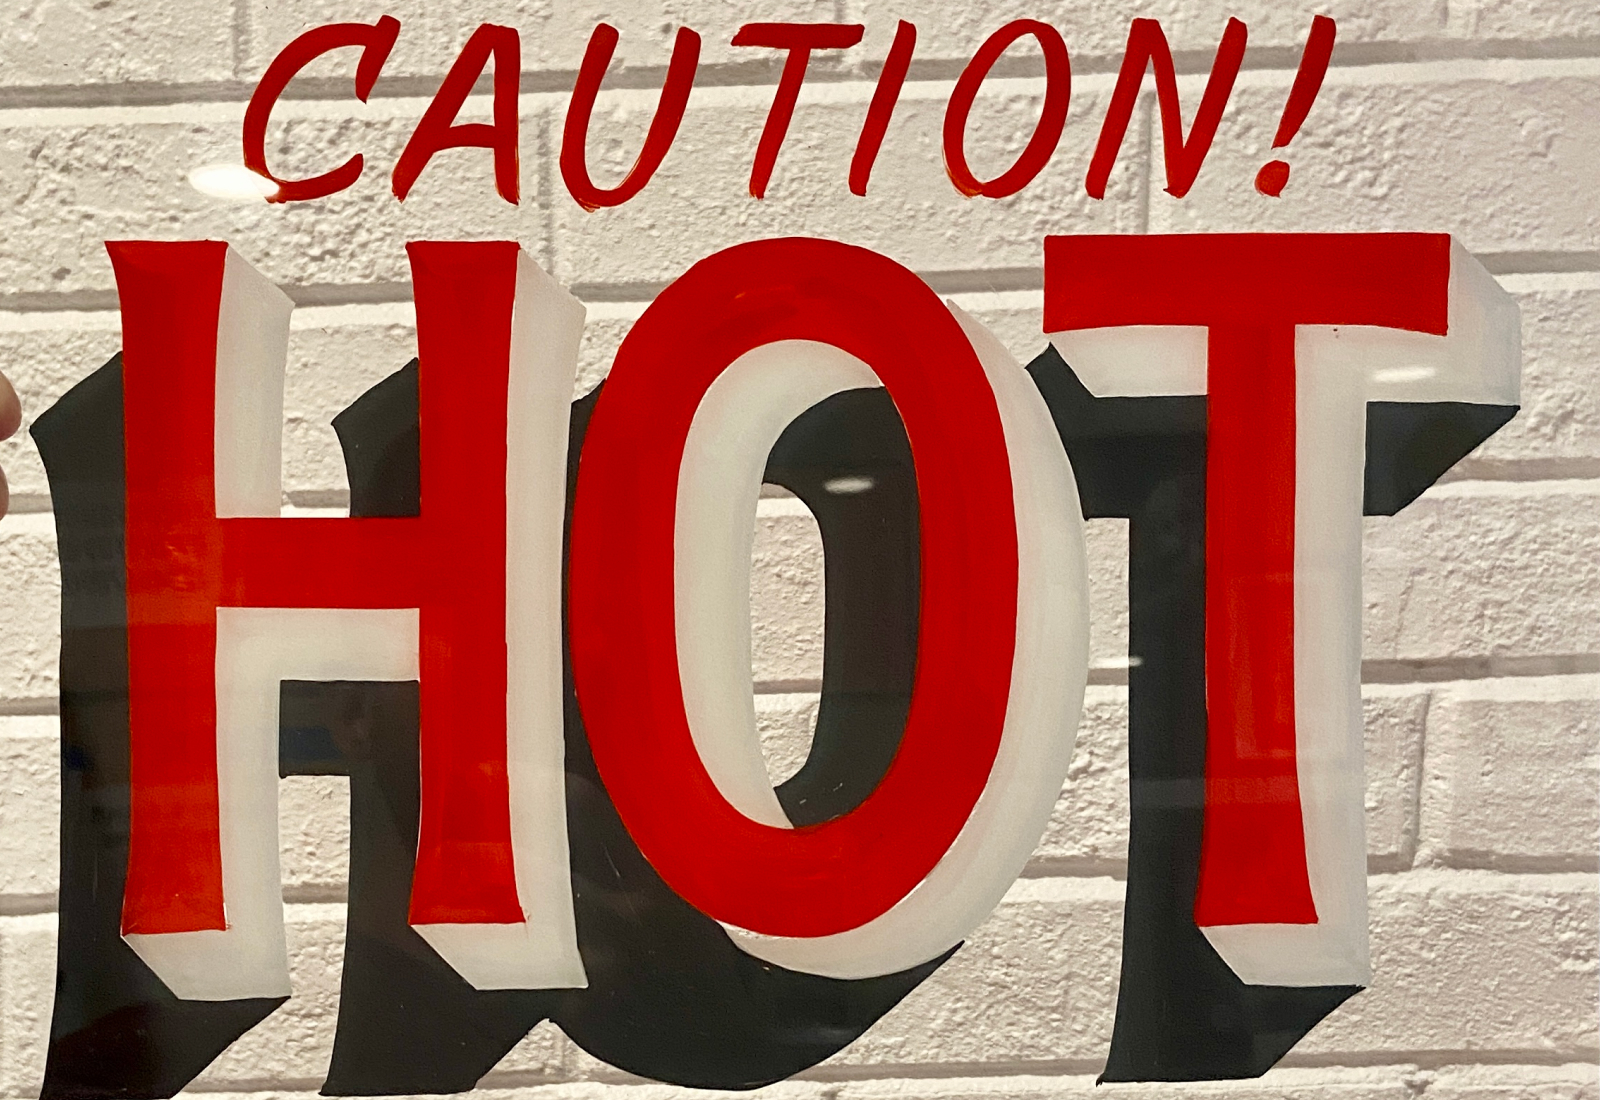 Hot! | Hand Painted Sign by Joey Carty